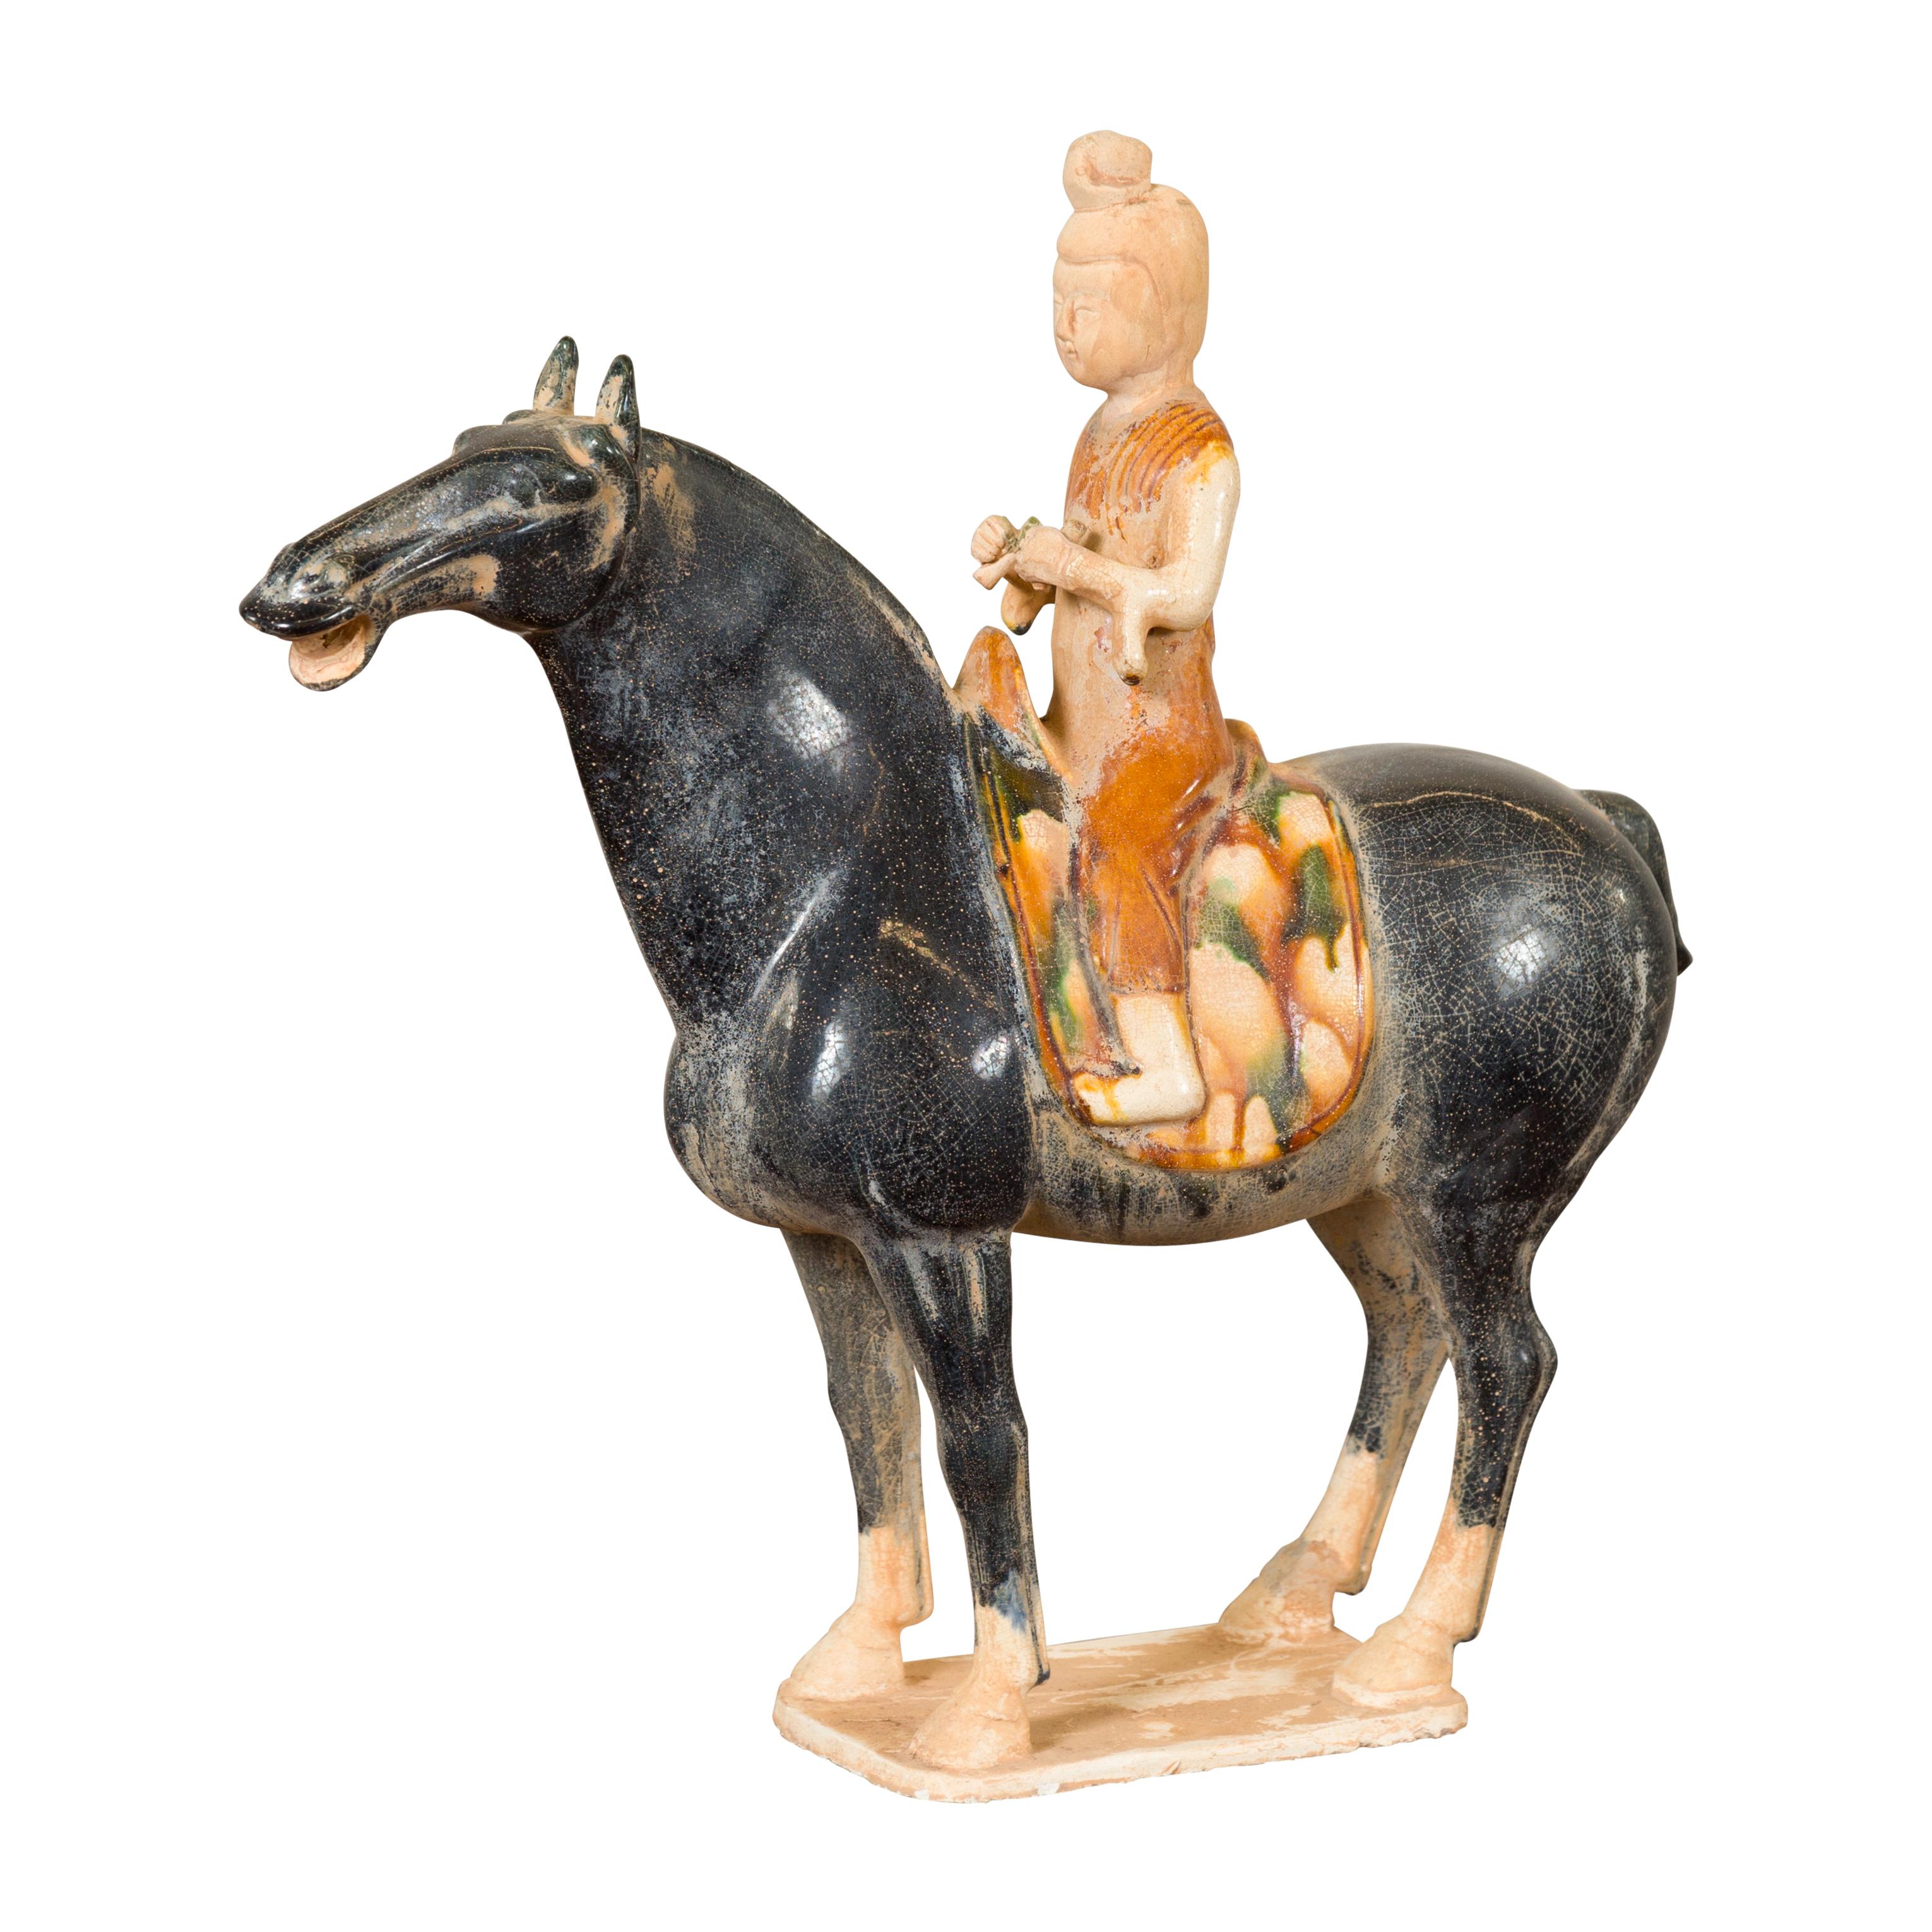 A Chinese Ming dynasty style glazed terracotta horse and rider sculpture from the 20th century with polychrome finish. Crafted in the Ming style, this small terracotta horse and rider attracts our attention with its tricolor glazed finish. A rider